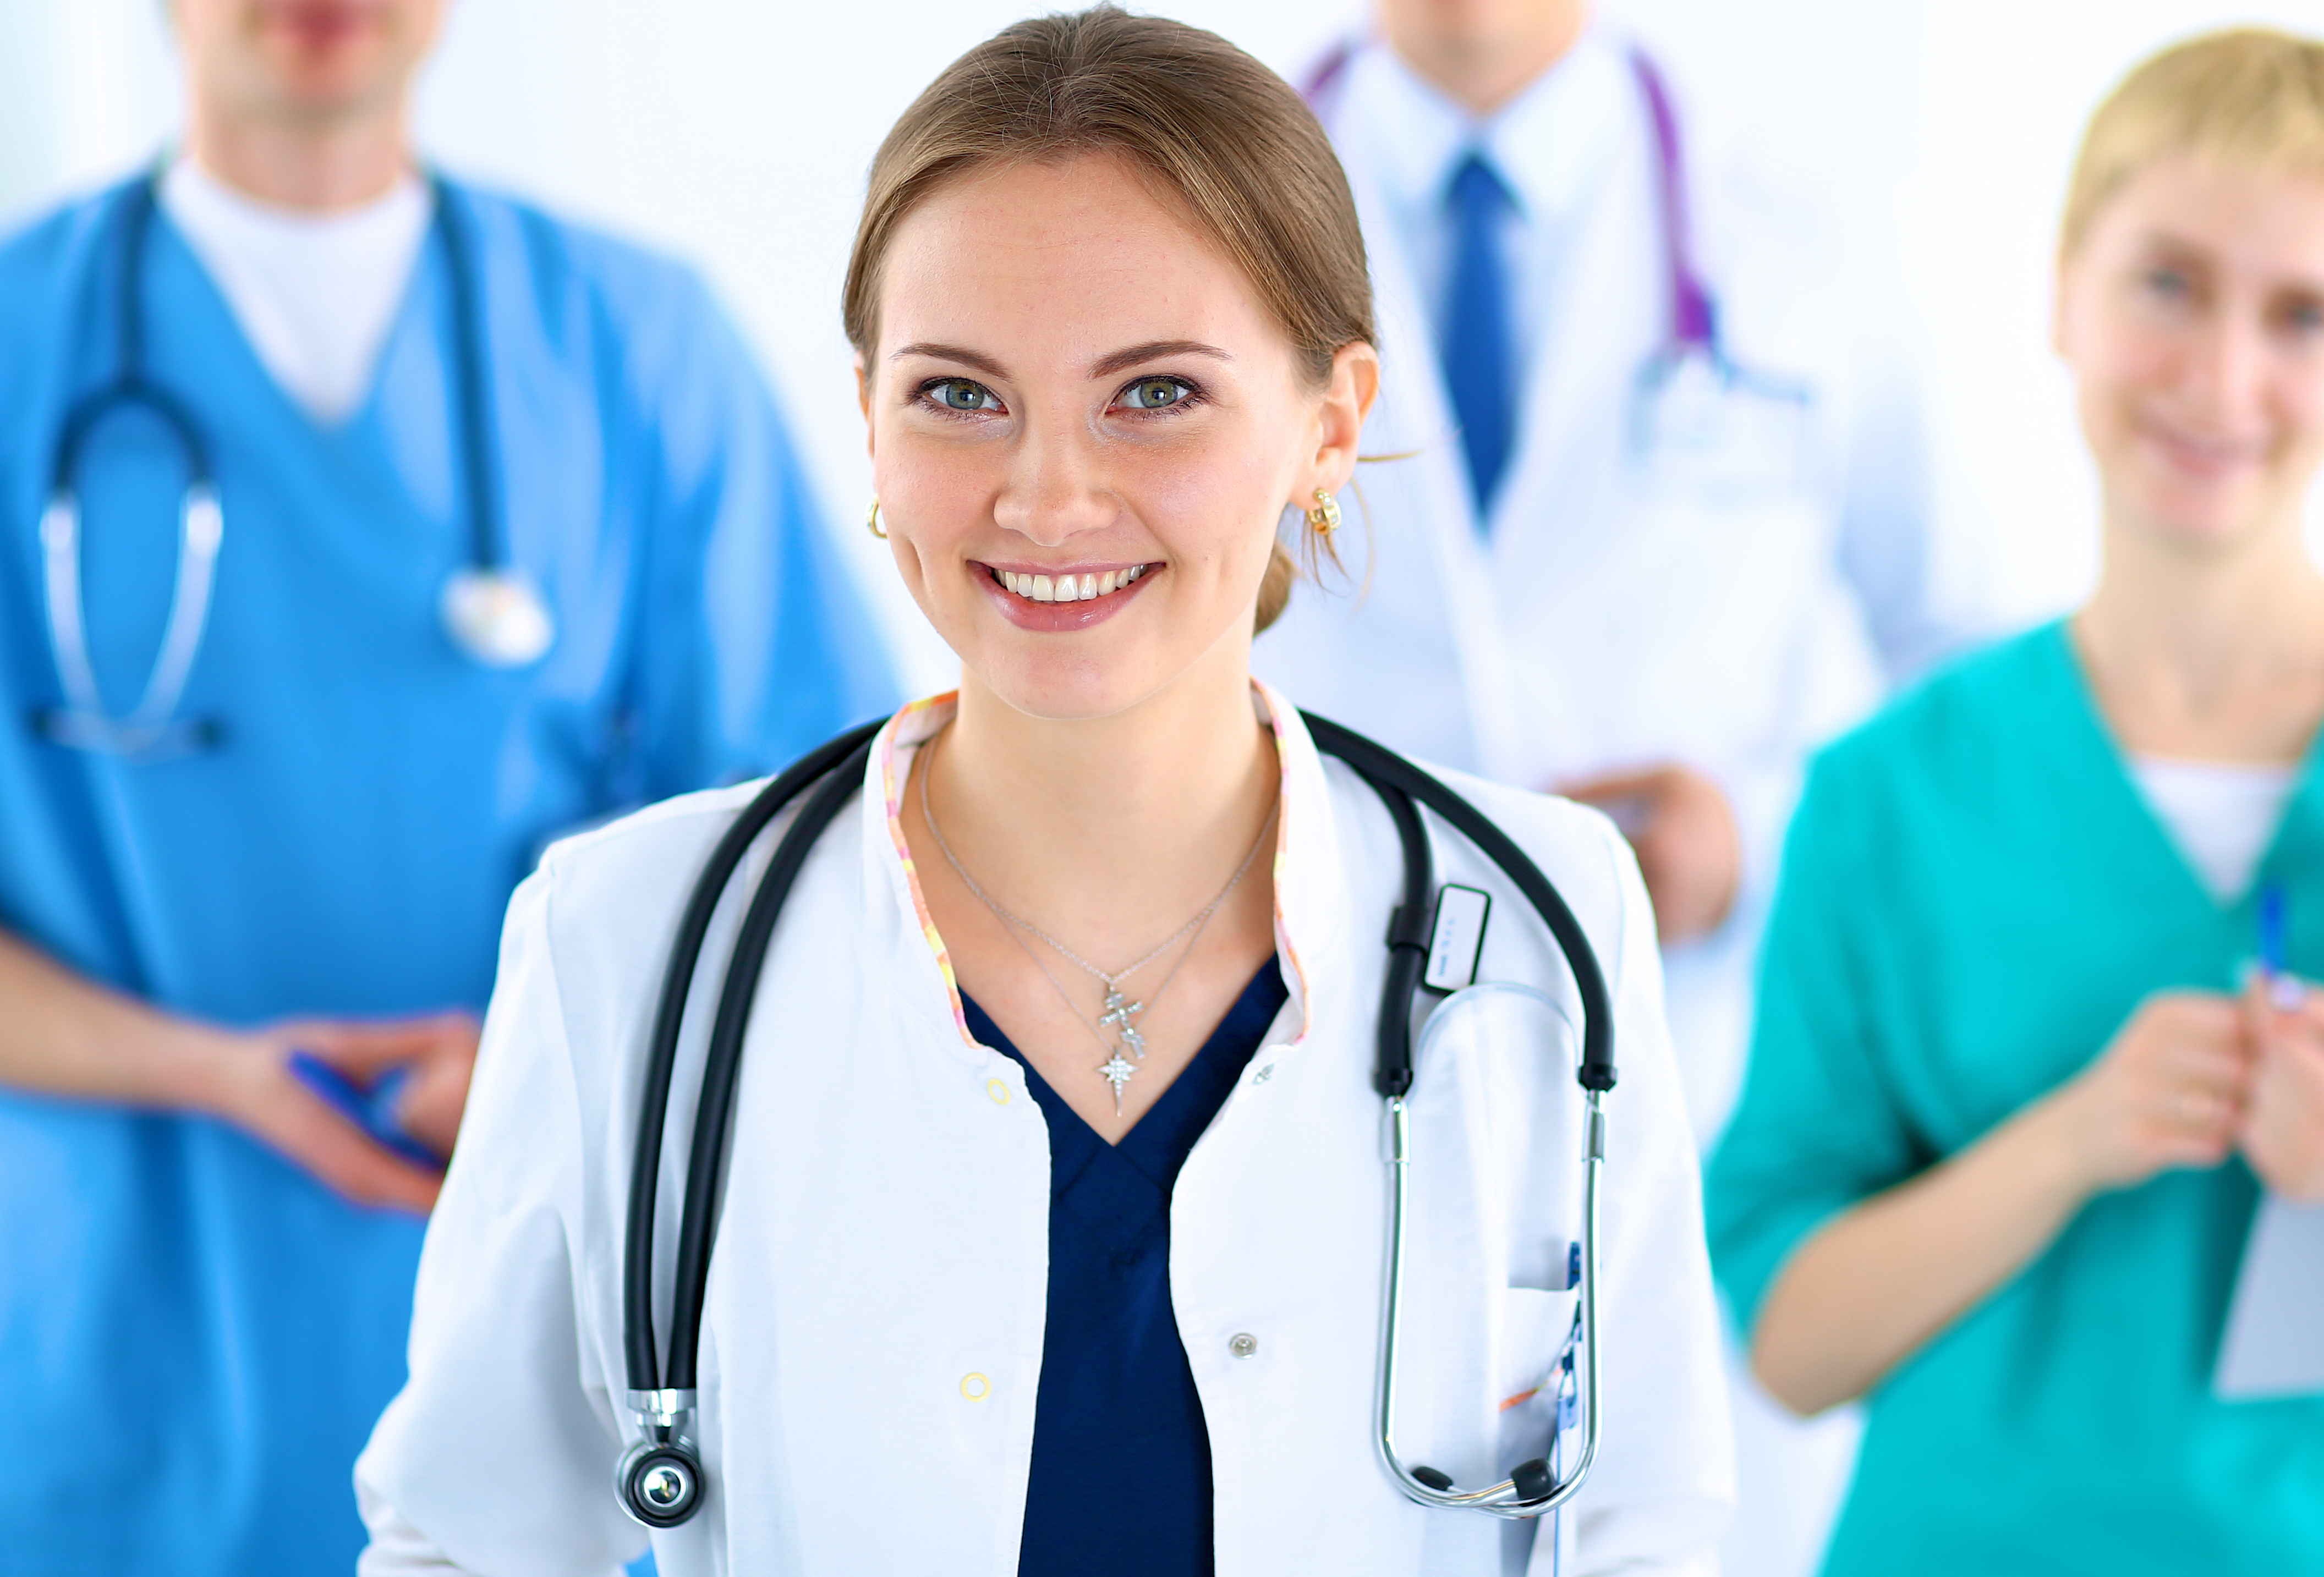 Stock image of Health Care Professionals (c) ShutterStock